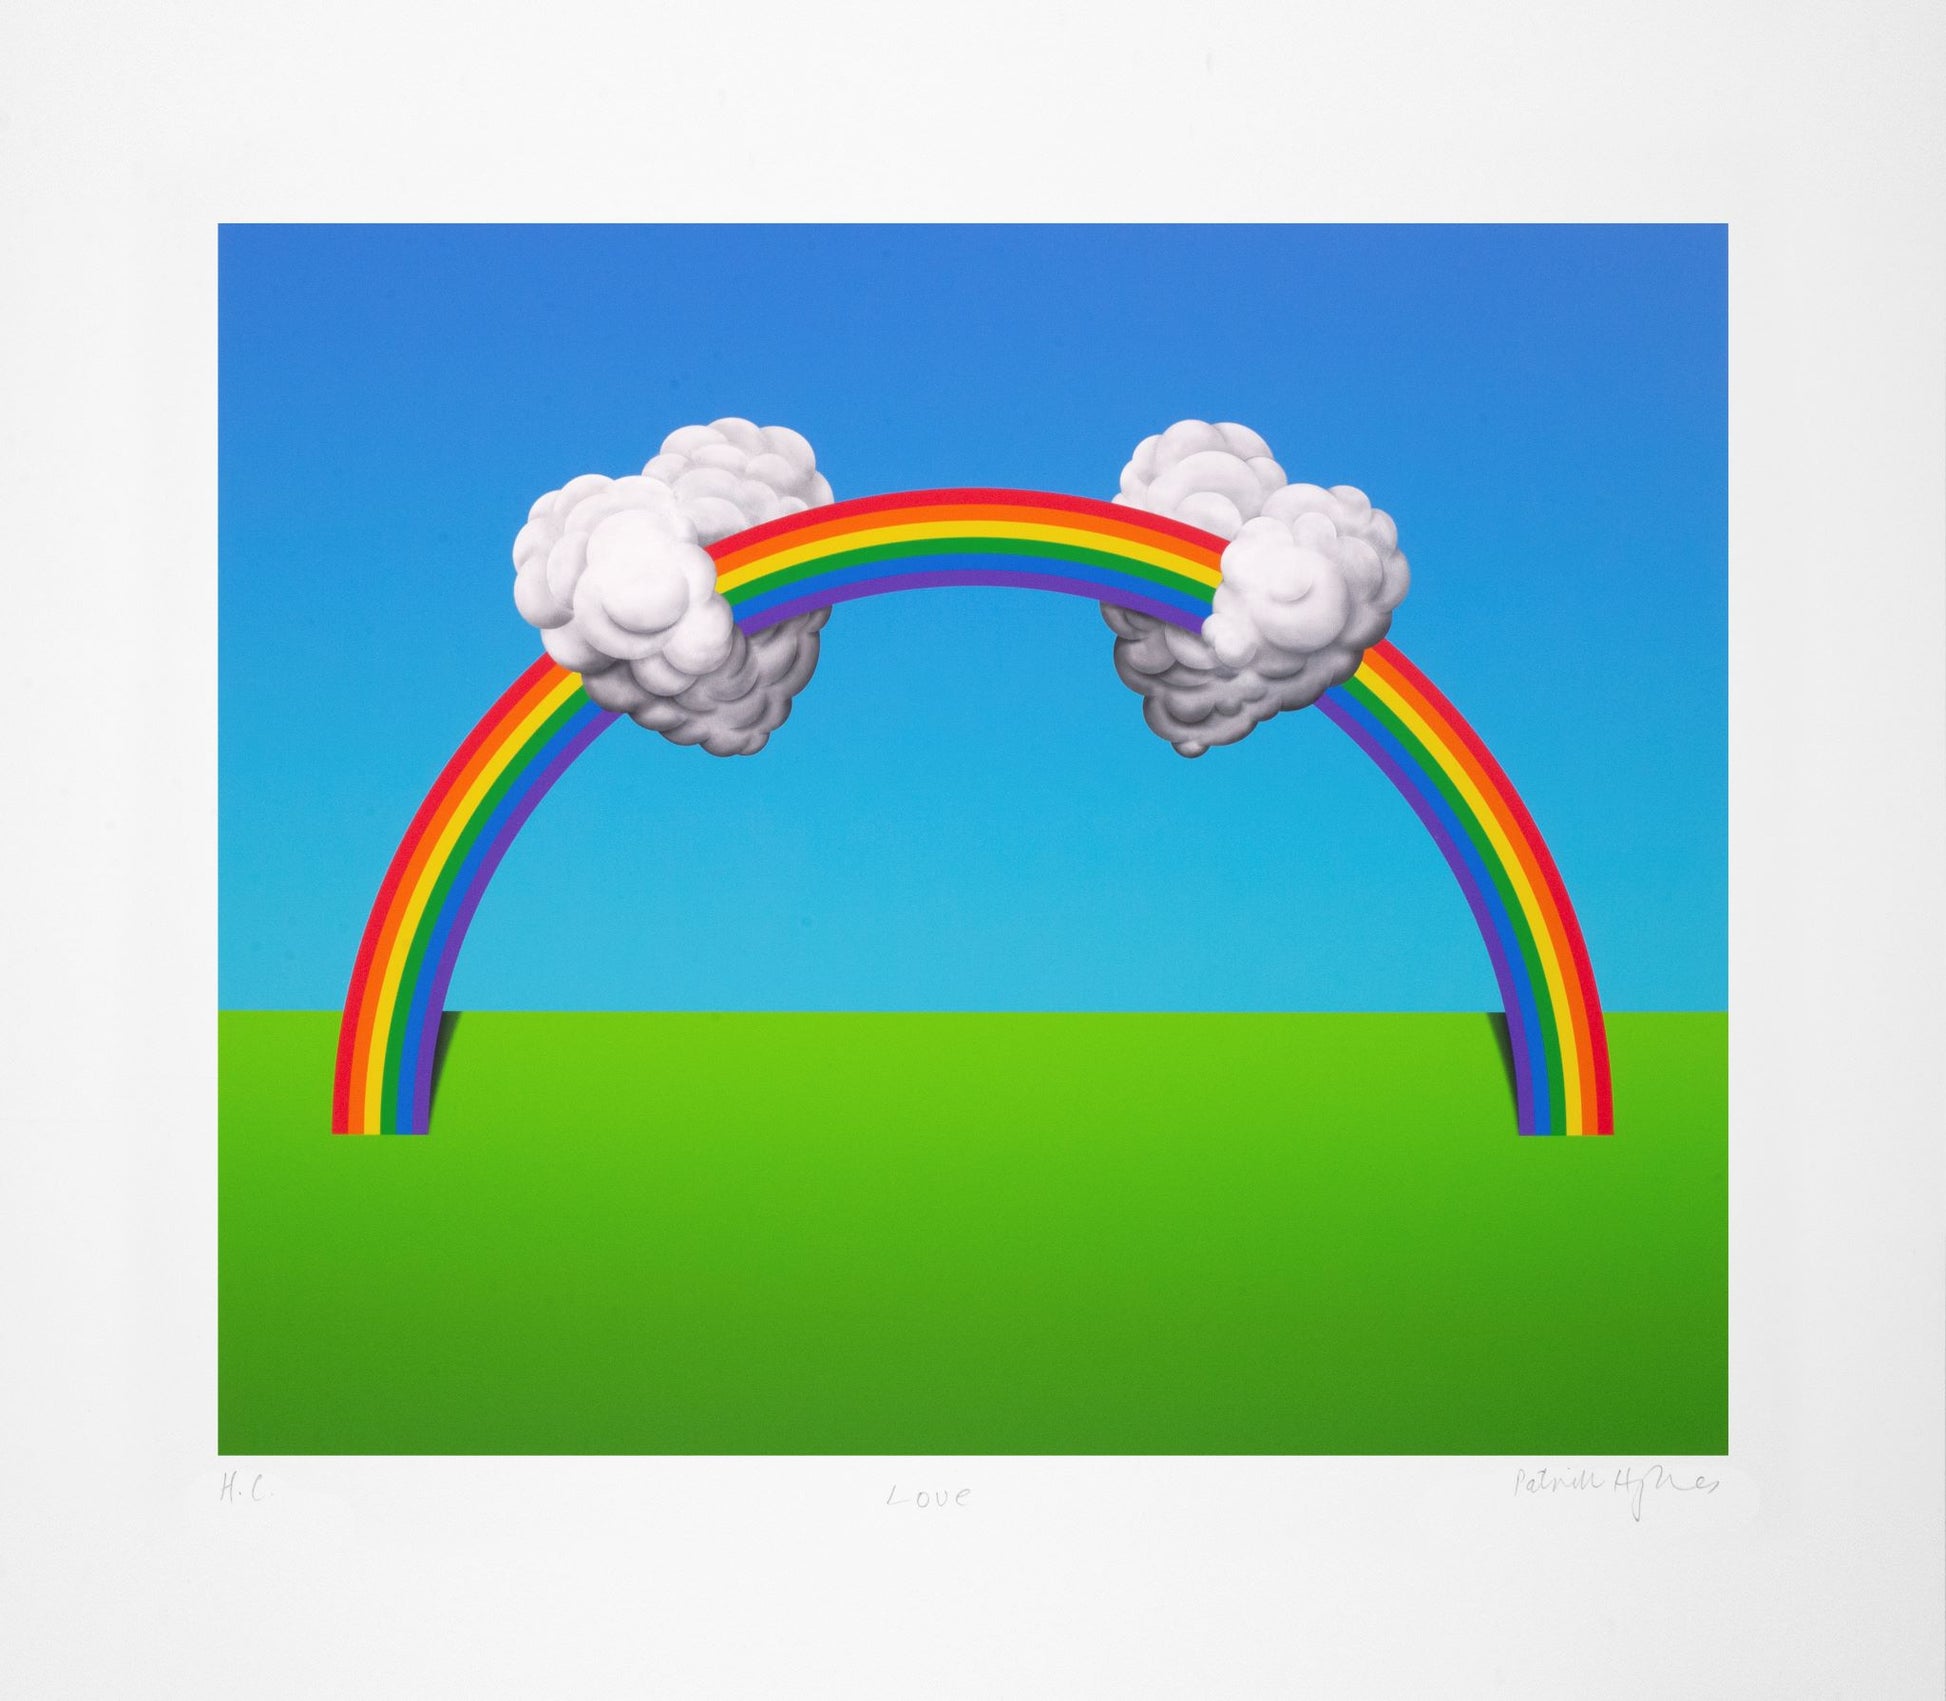 Capture the essence of love with Patrick Hughes' 'Love' art print, where two hearts intertwined amidst a vibrant rainbow. A captivating symbol of affection and connection.